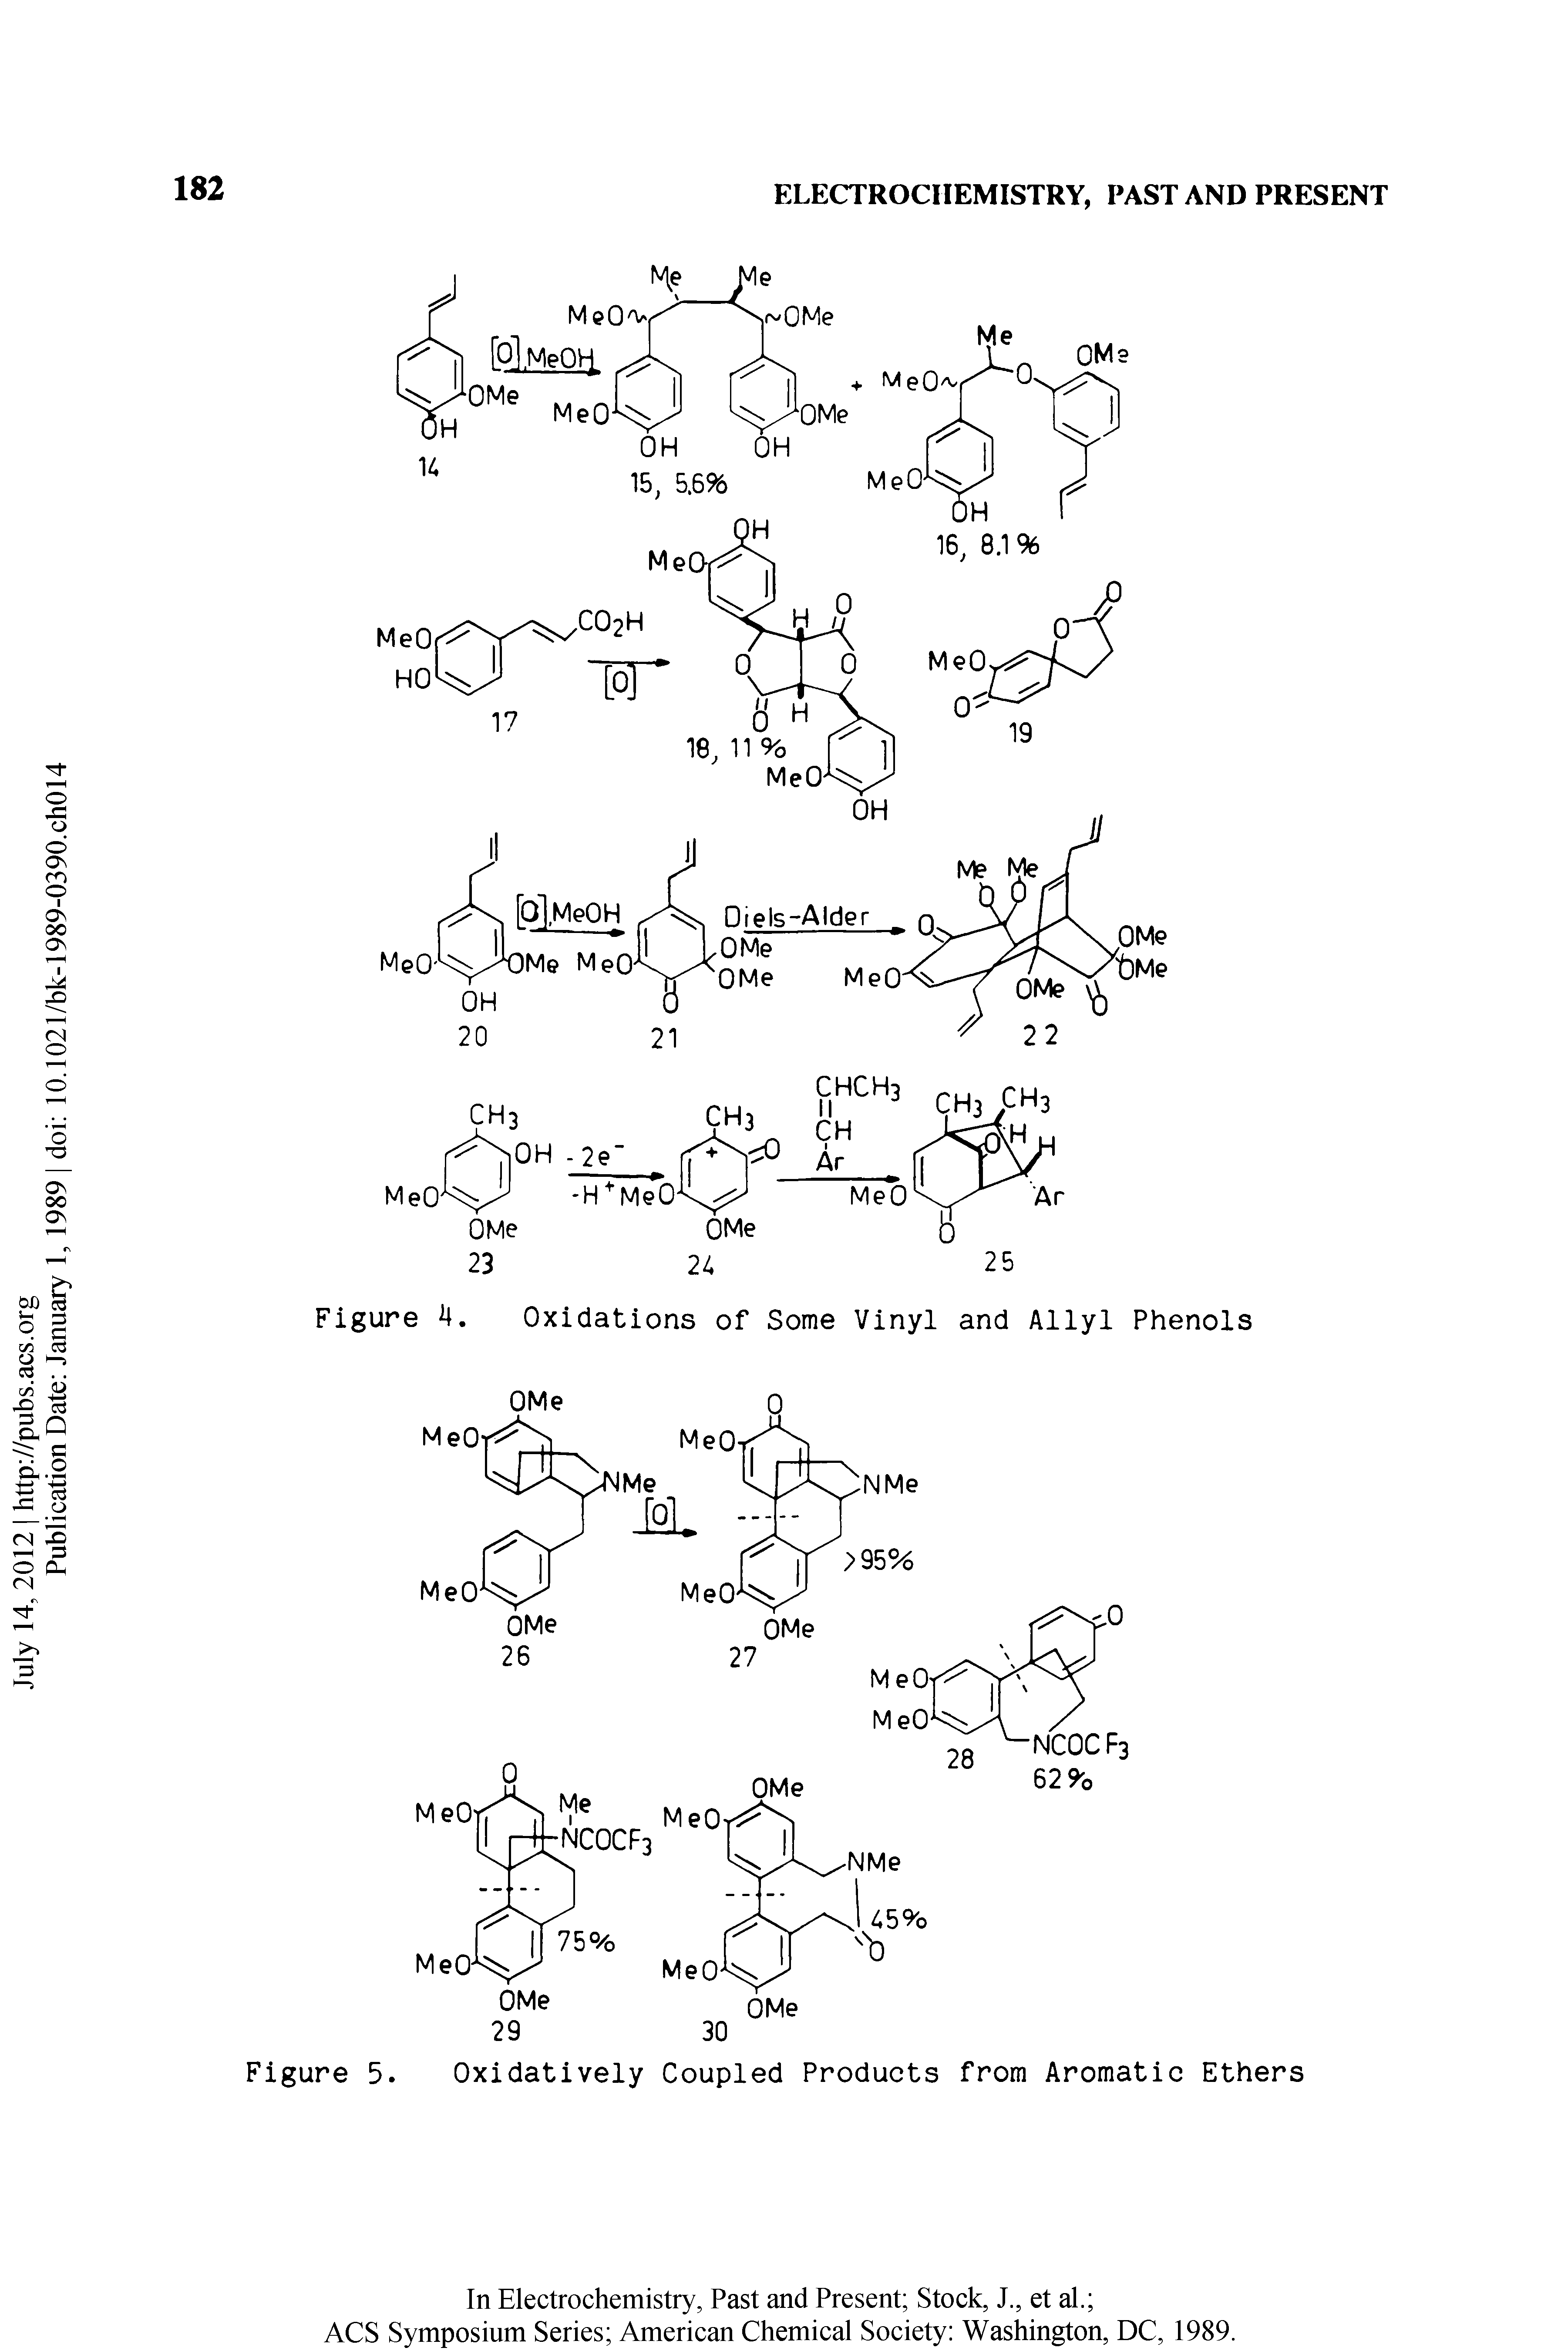 Figure 5. Oxidatively Coupled Products from Aromatic Ethers...